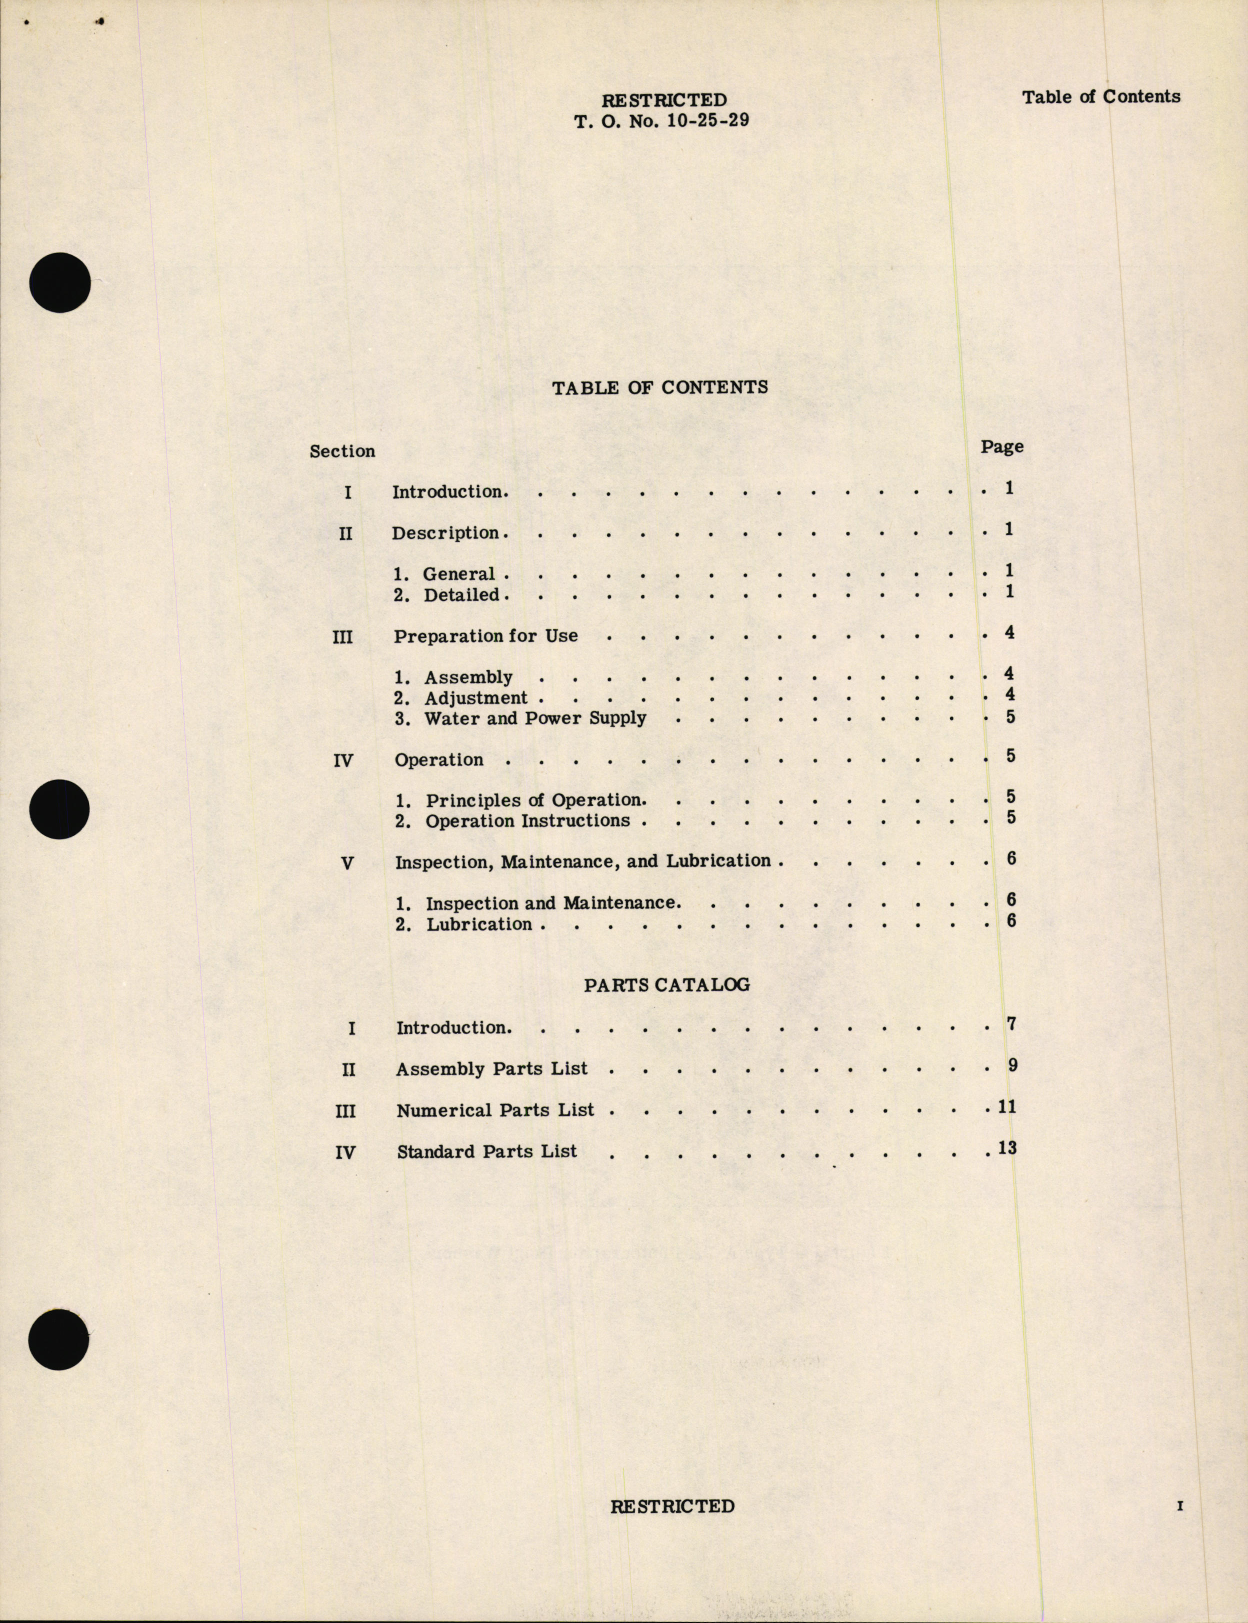 Sample page 5 from AirCorps Library document: Handbook of Operation and Service Instructions with Parts Catalog for Type A-2A Photographic Print Washer